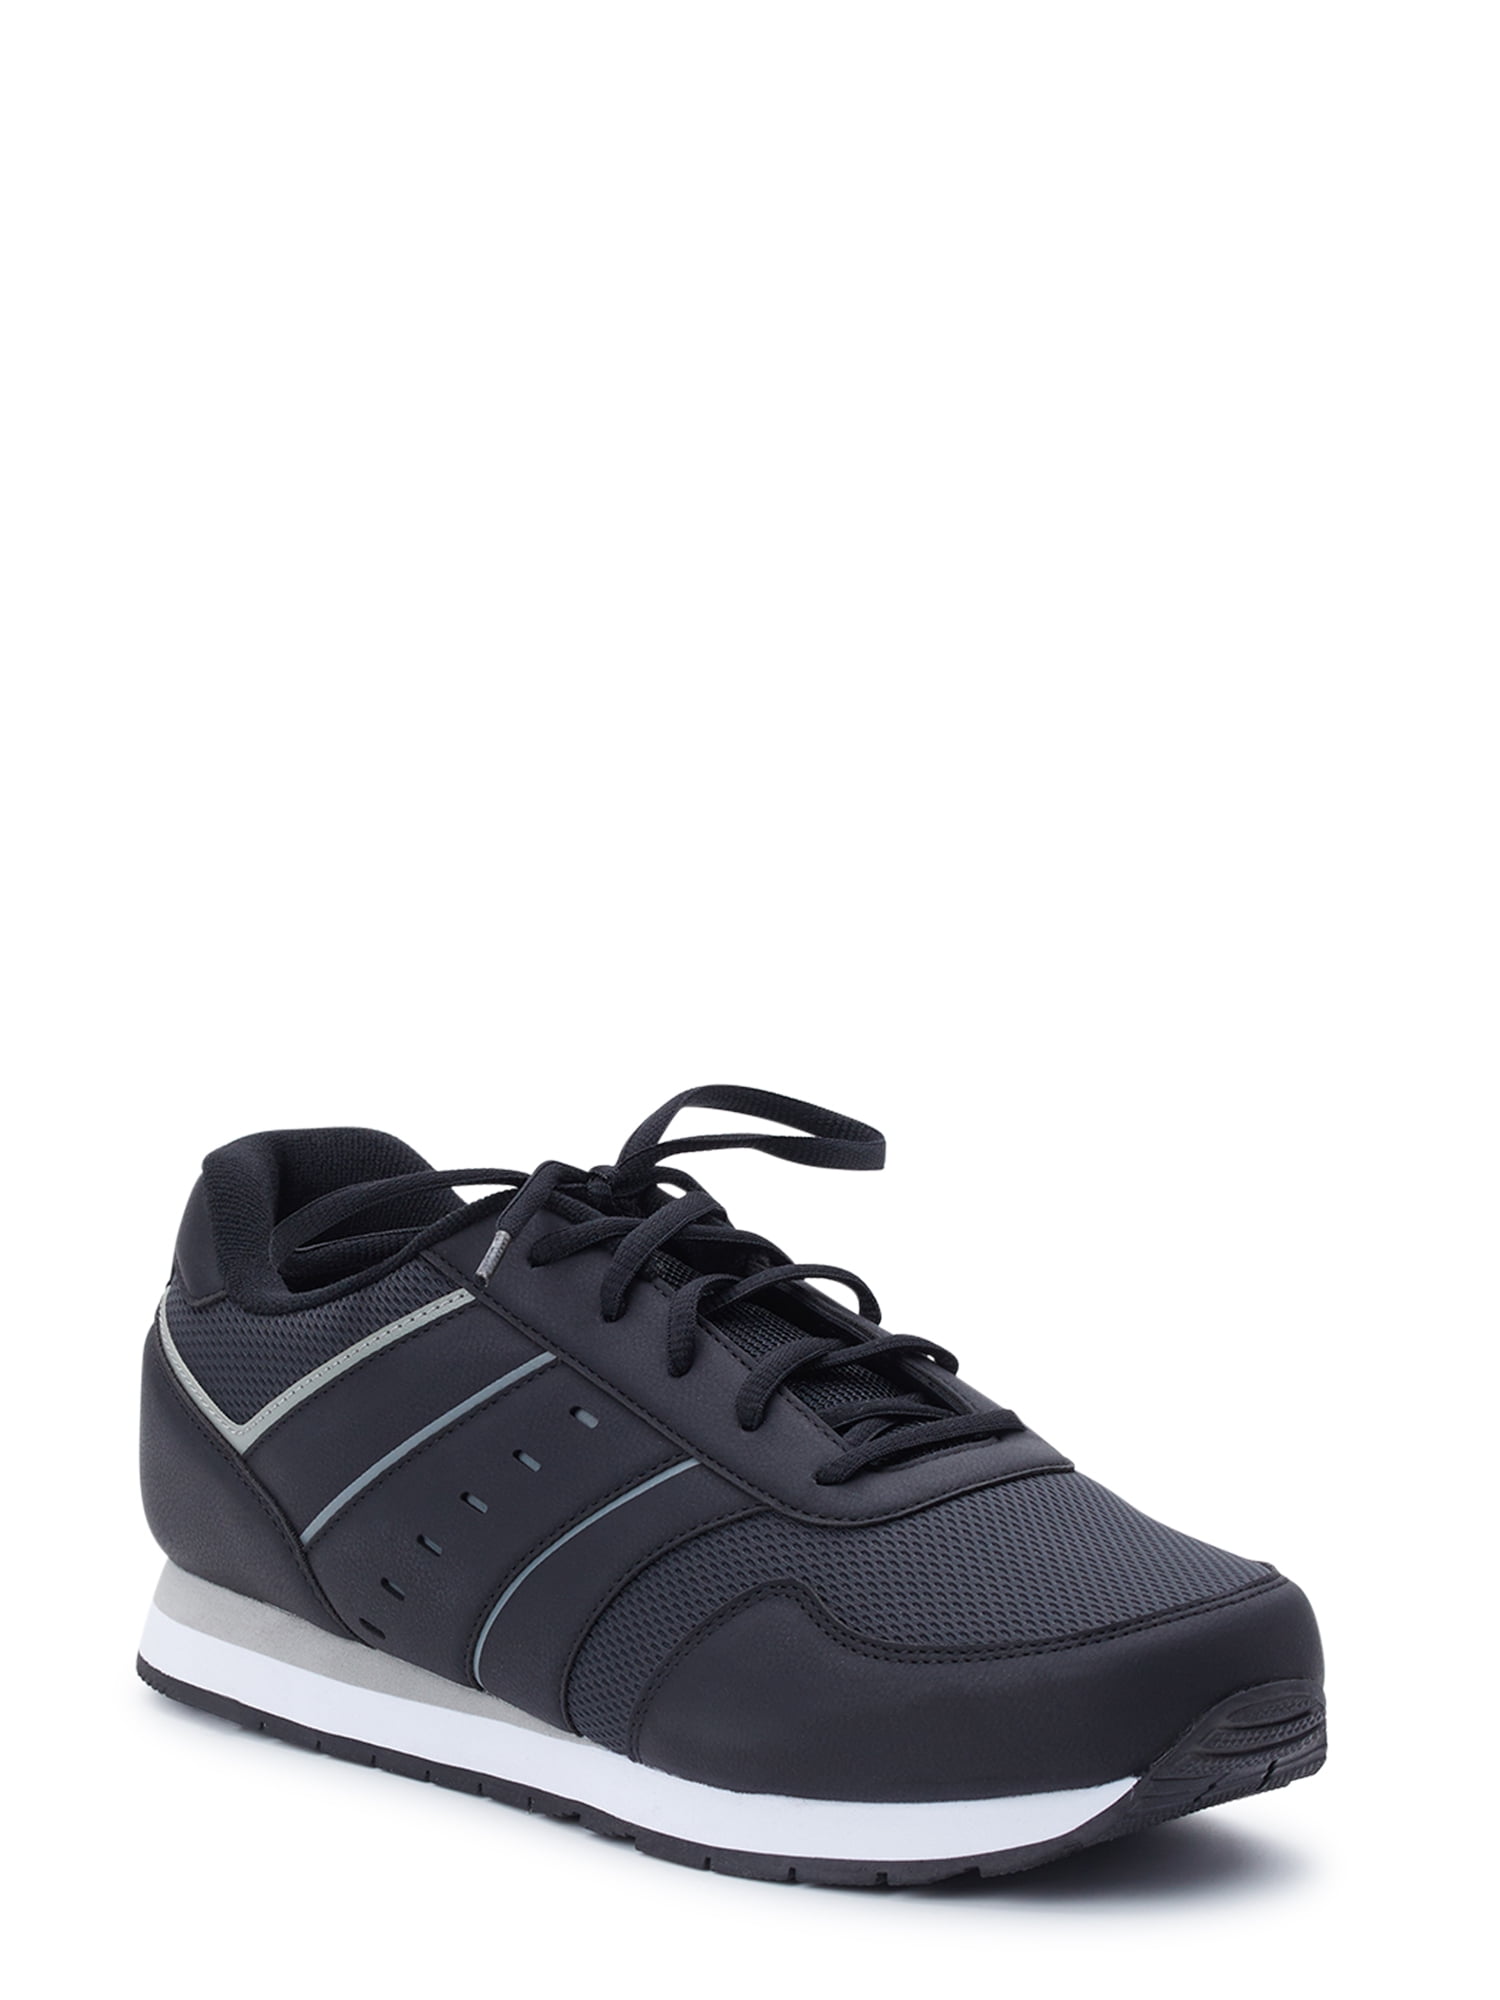 Athletic Works Men's Silver Series 3 Lace Up Wide Width Athletic Shoes 